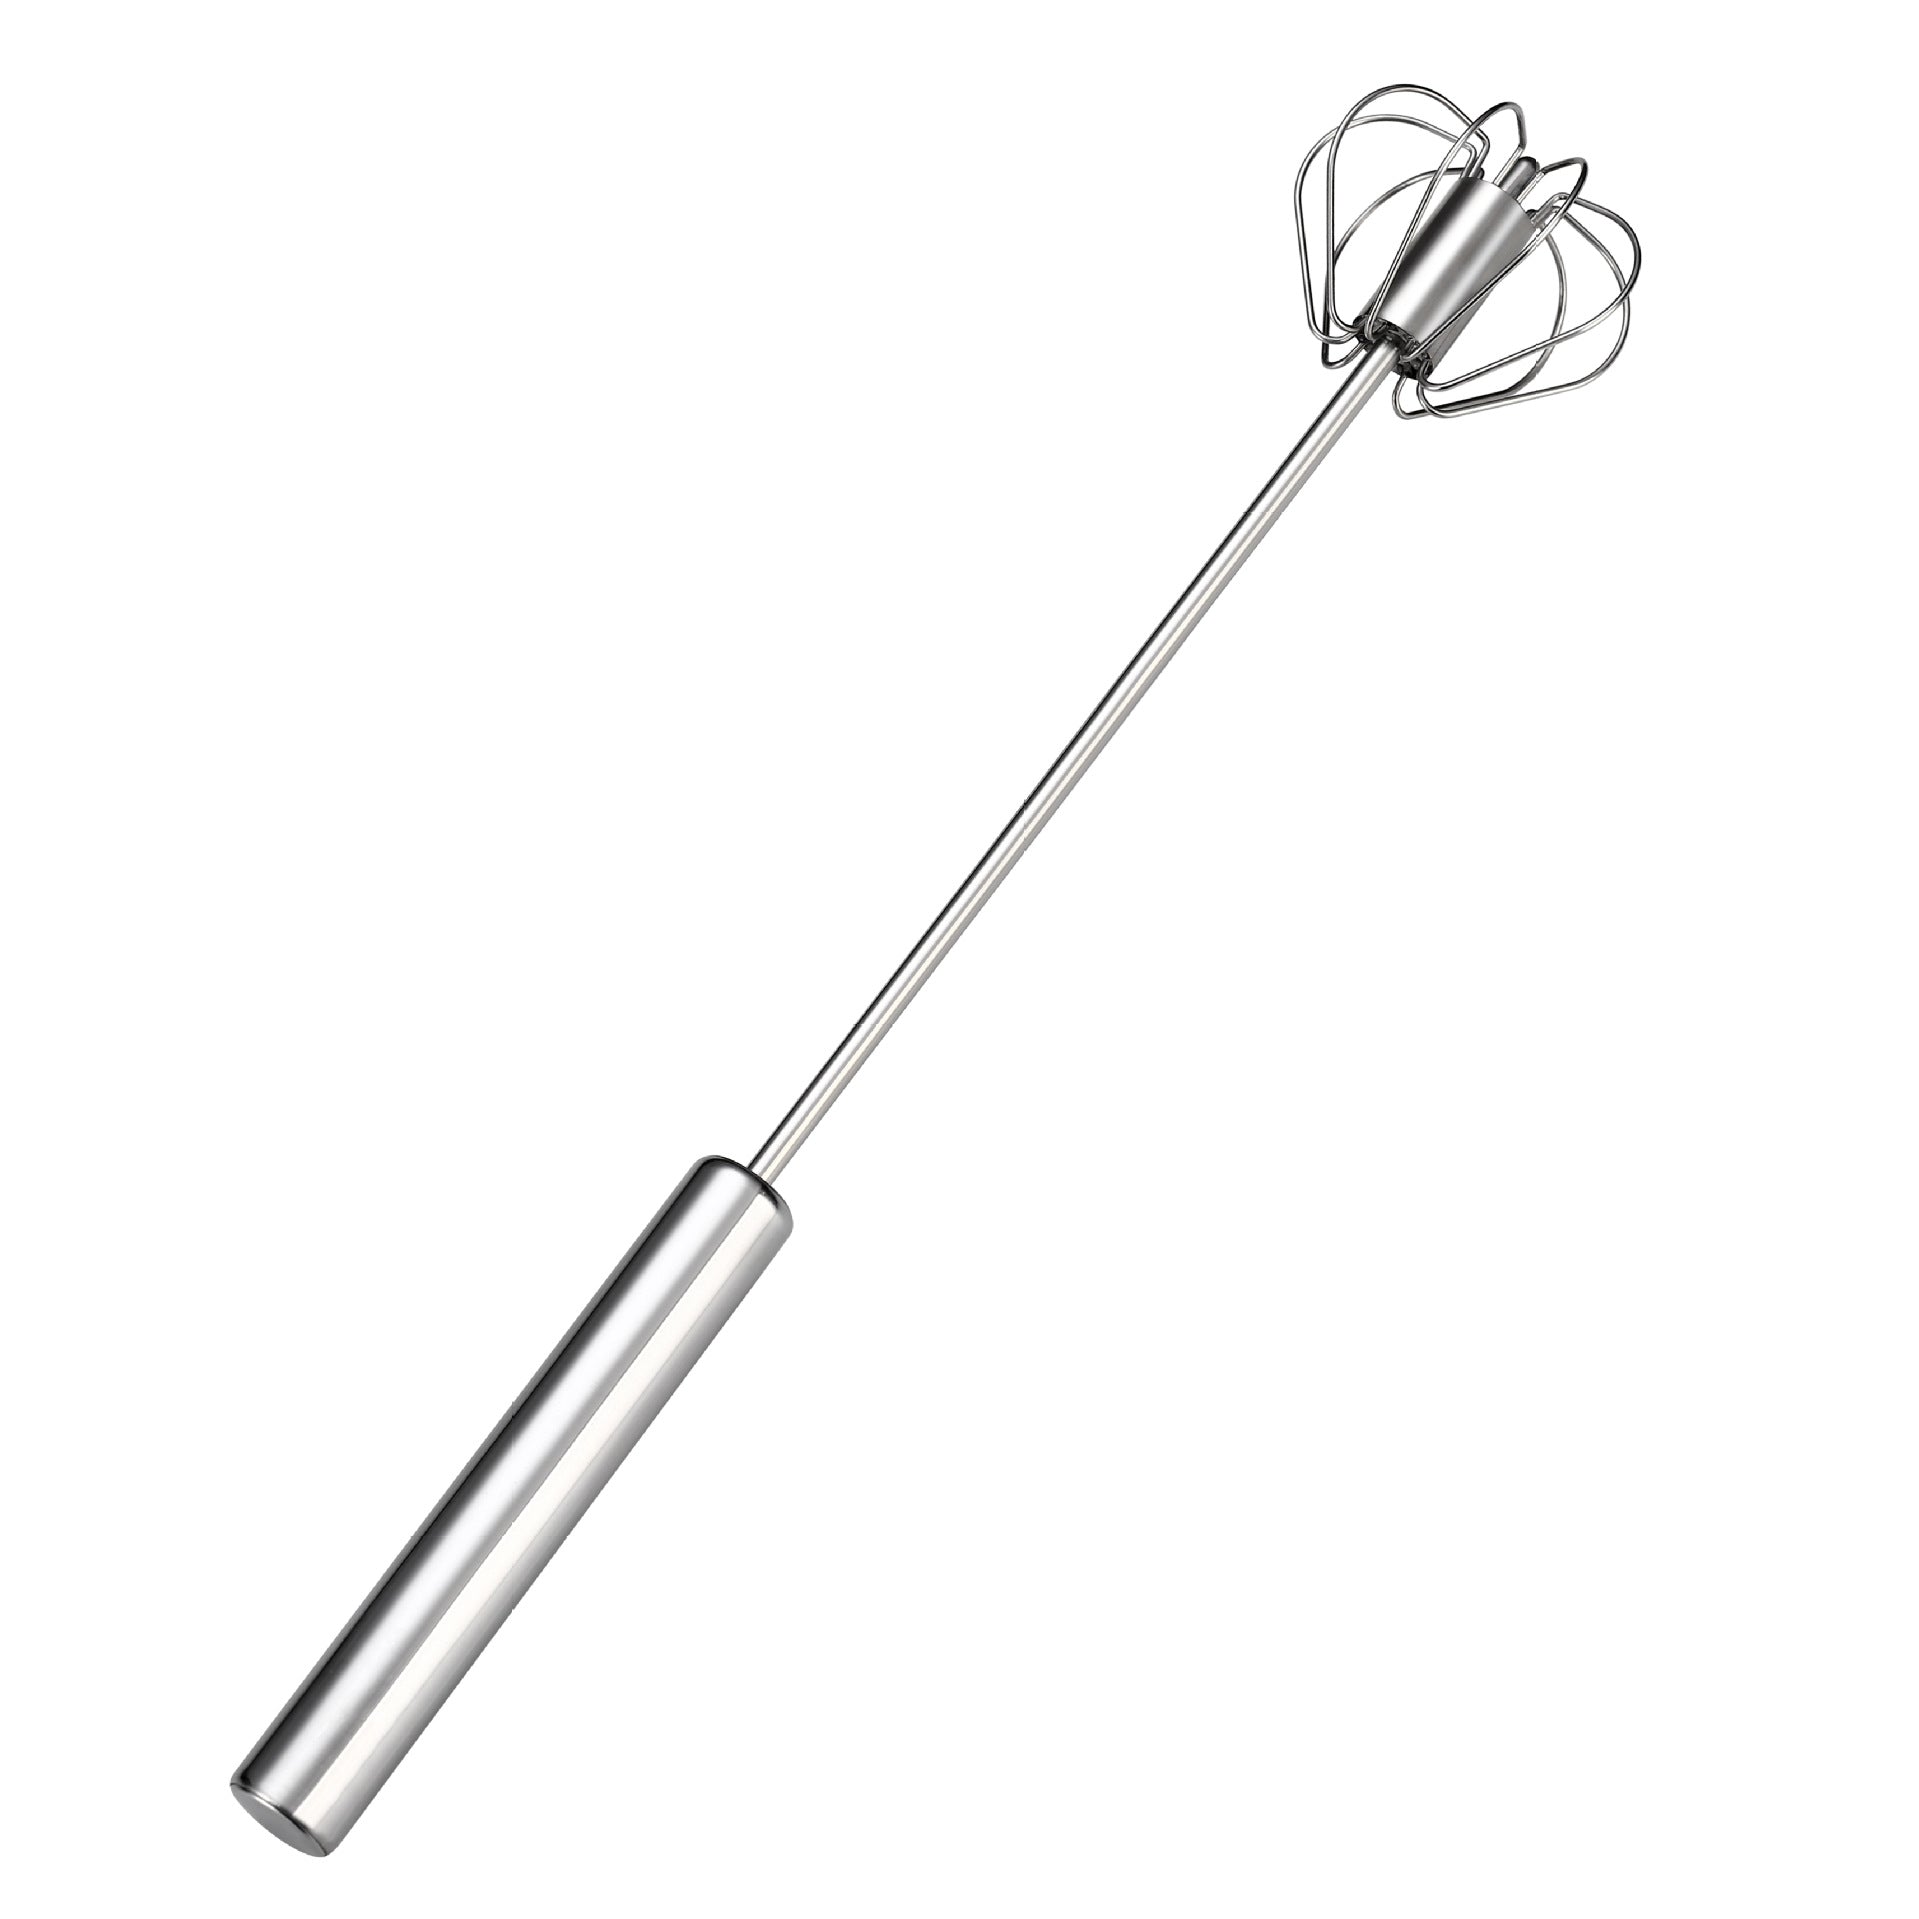 Portable Stainless Steel Semi-automatic Rotary Whisk For Home